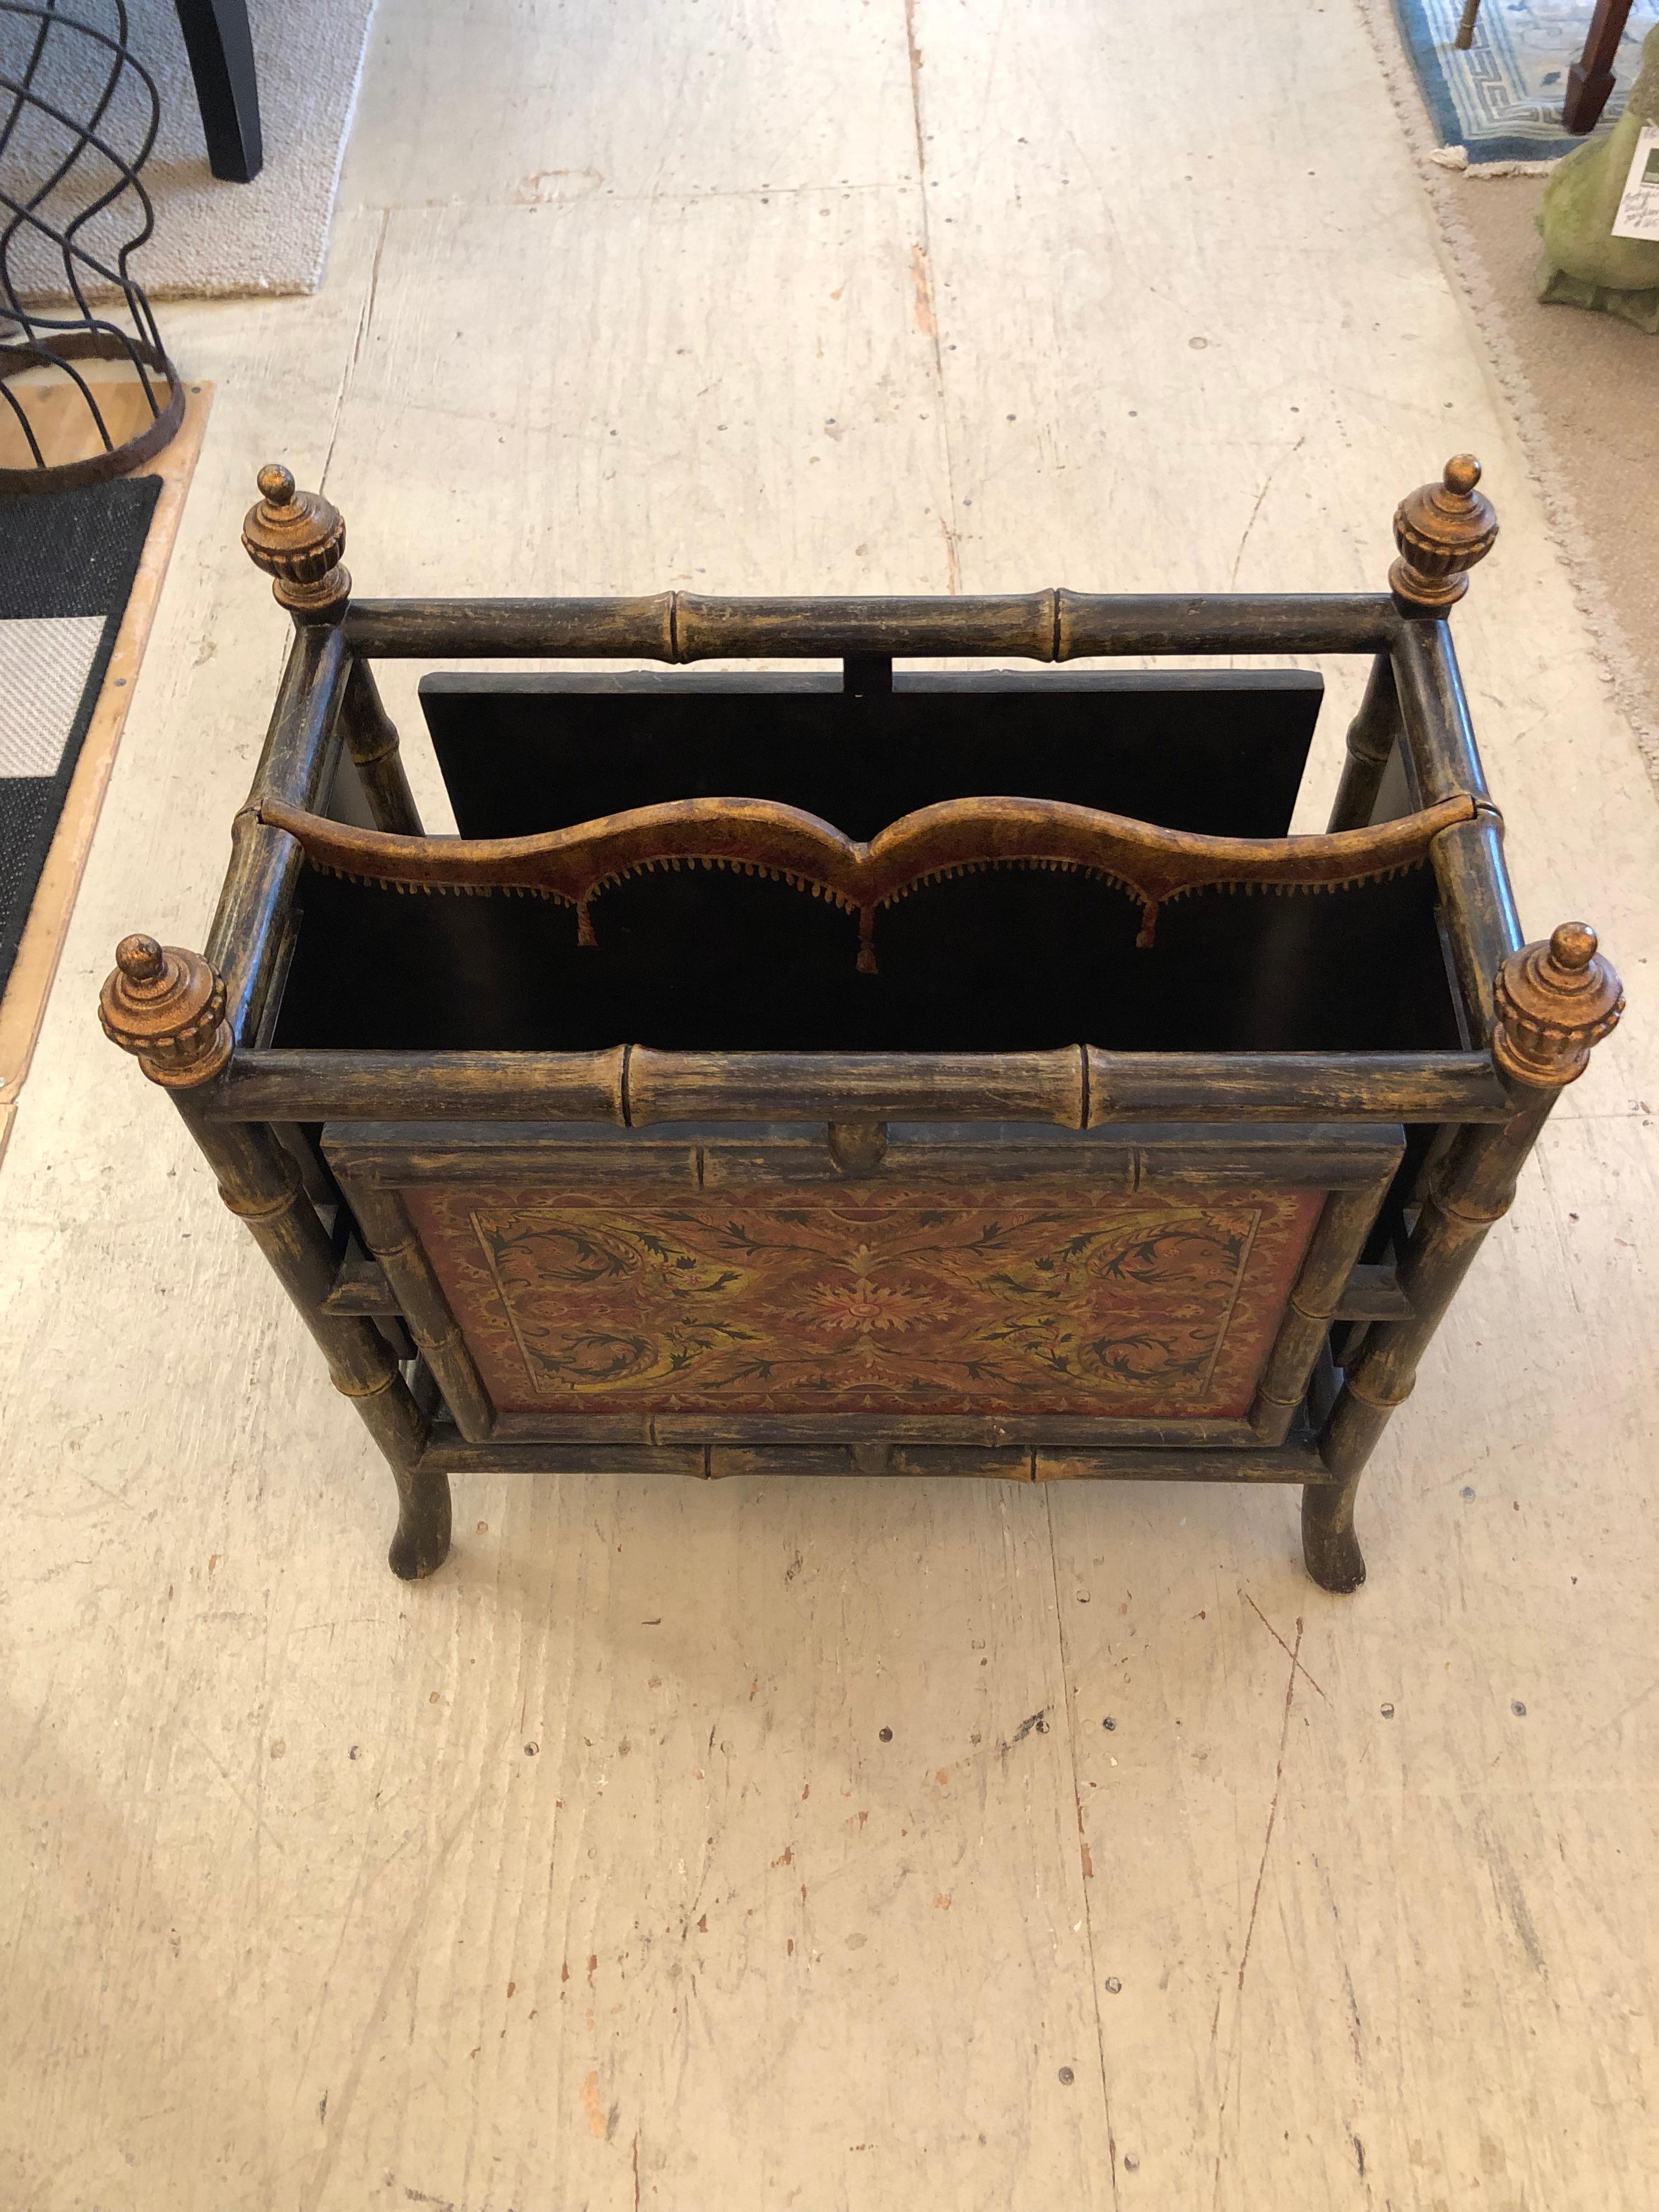 Philippine Impressive Decorative Carved and Painted Faux Bamboo and Wood Magazine Rack